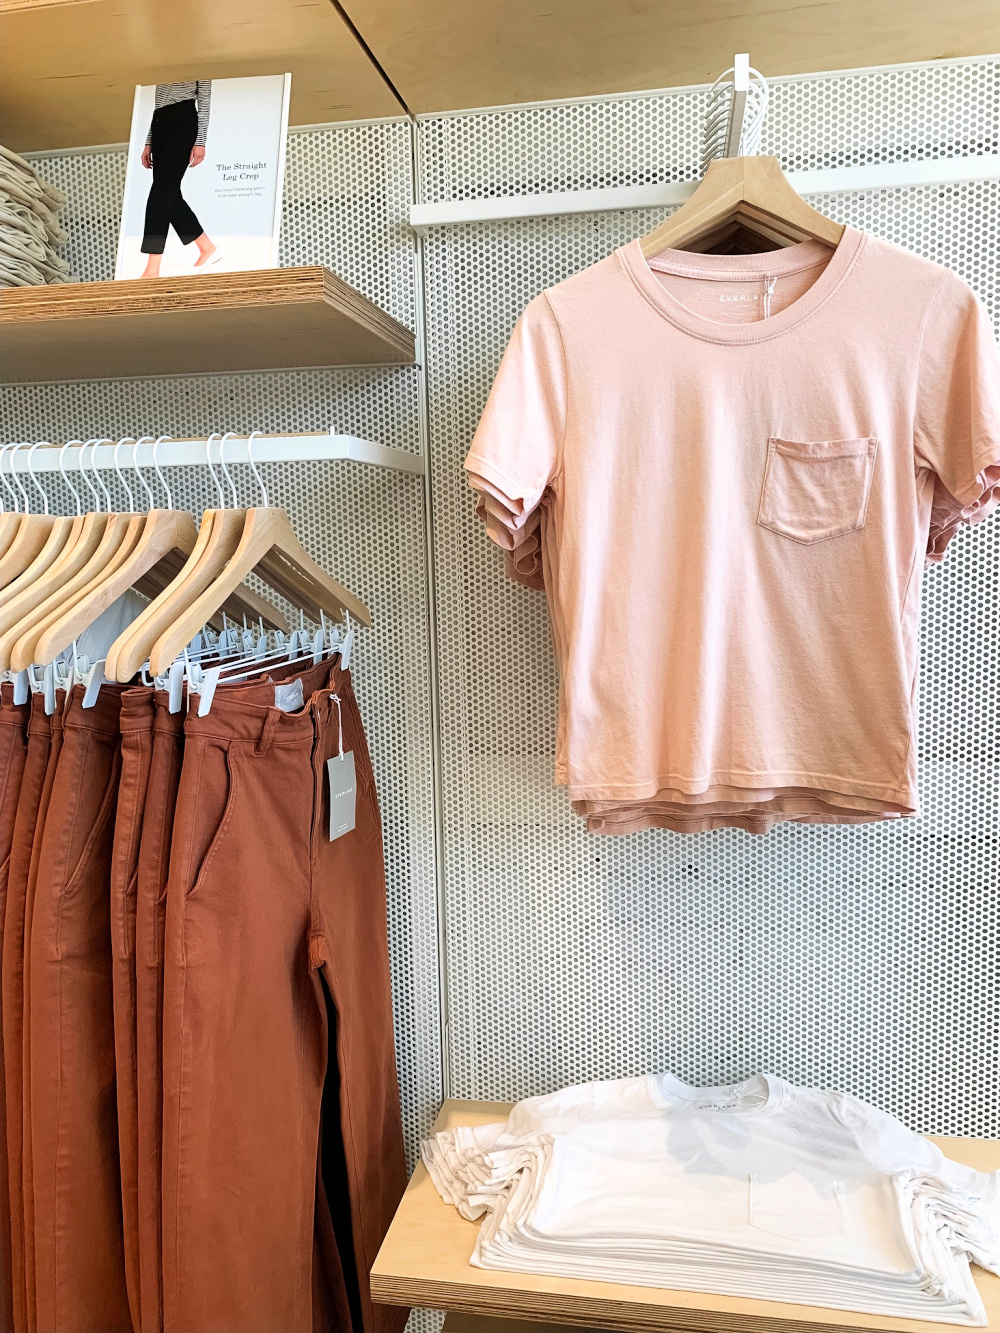 Everlane straight leg crop pants in "Cider" (rust) and cotton pocket tee in "Rose (pigment dyed)". Details at une femme d'un certain age.